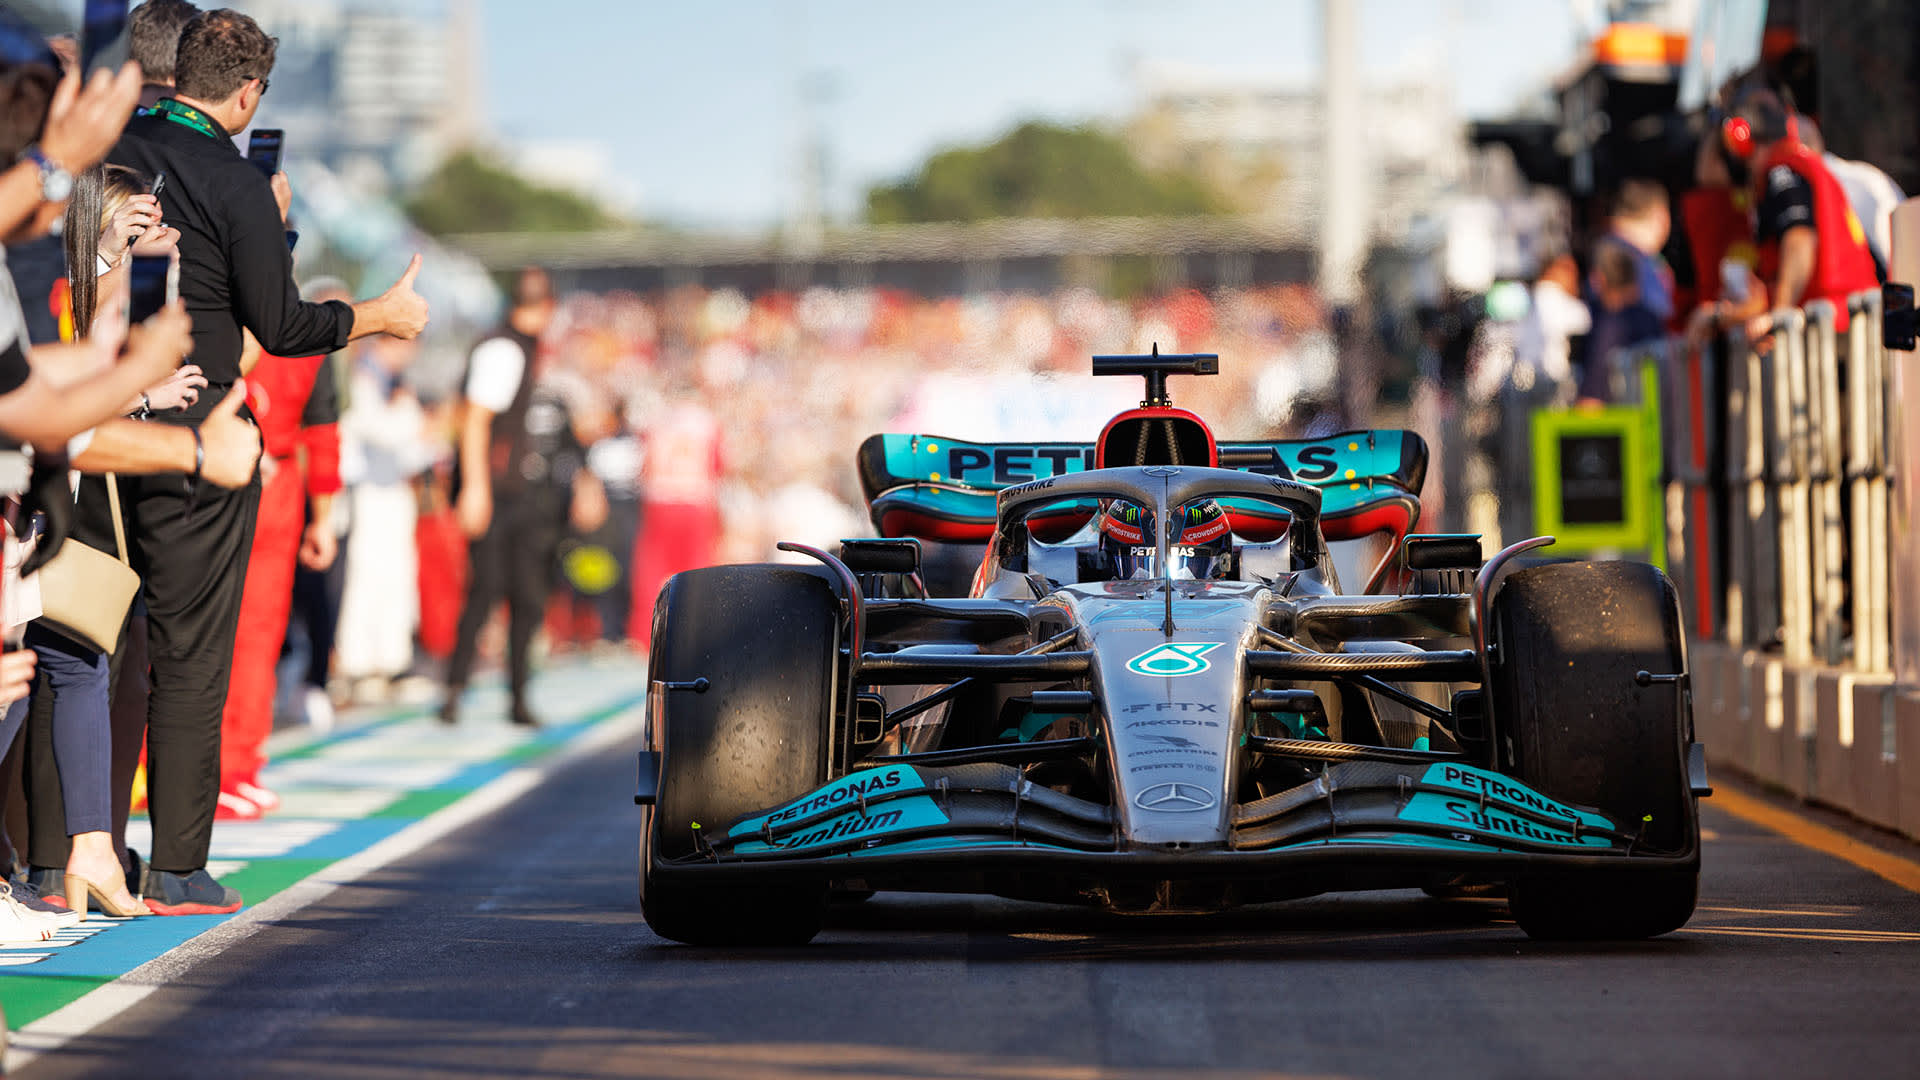 Mercedes steeling themselves for challenging Imola Sprint weekend Formula 1®